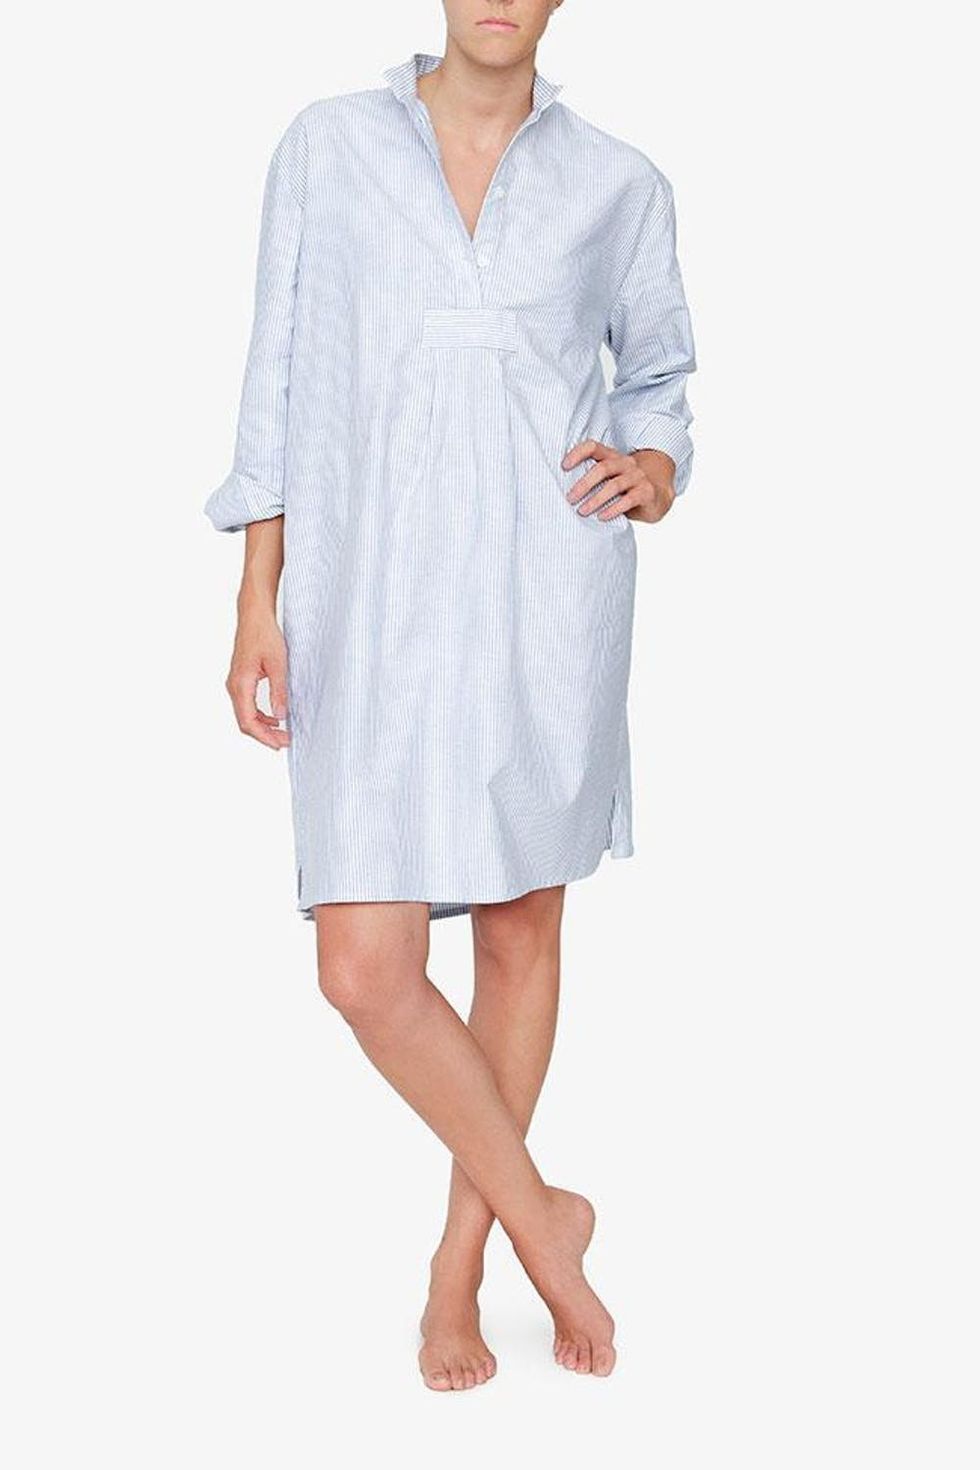 Mother’s Day Gift Guide 2018: PJs, Robes, Slippers, More Relaxing ...